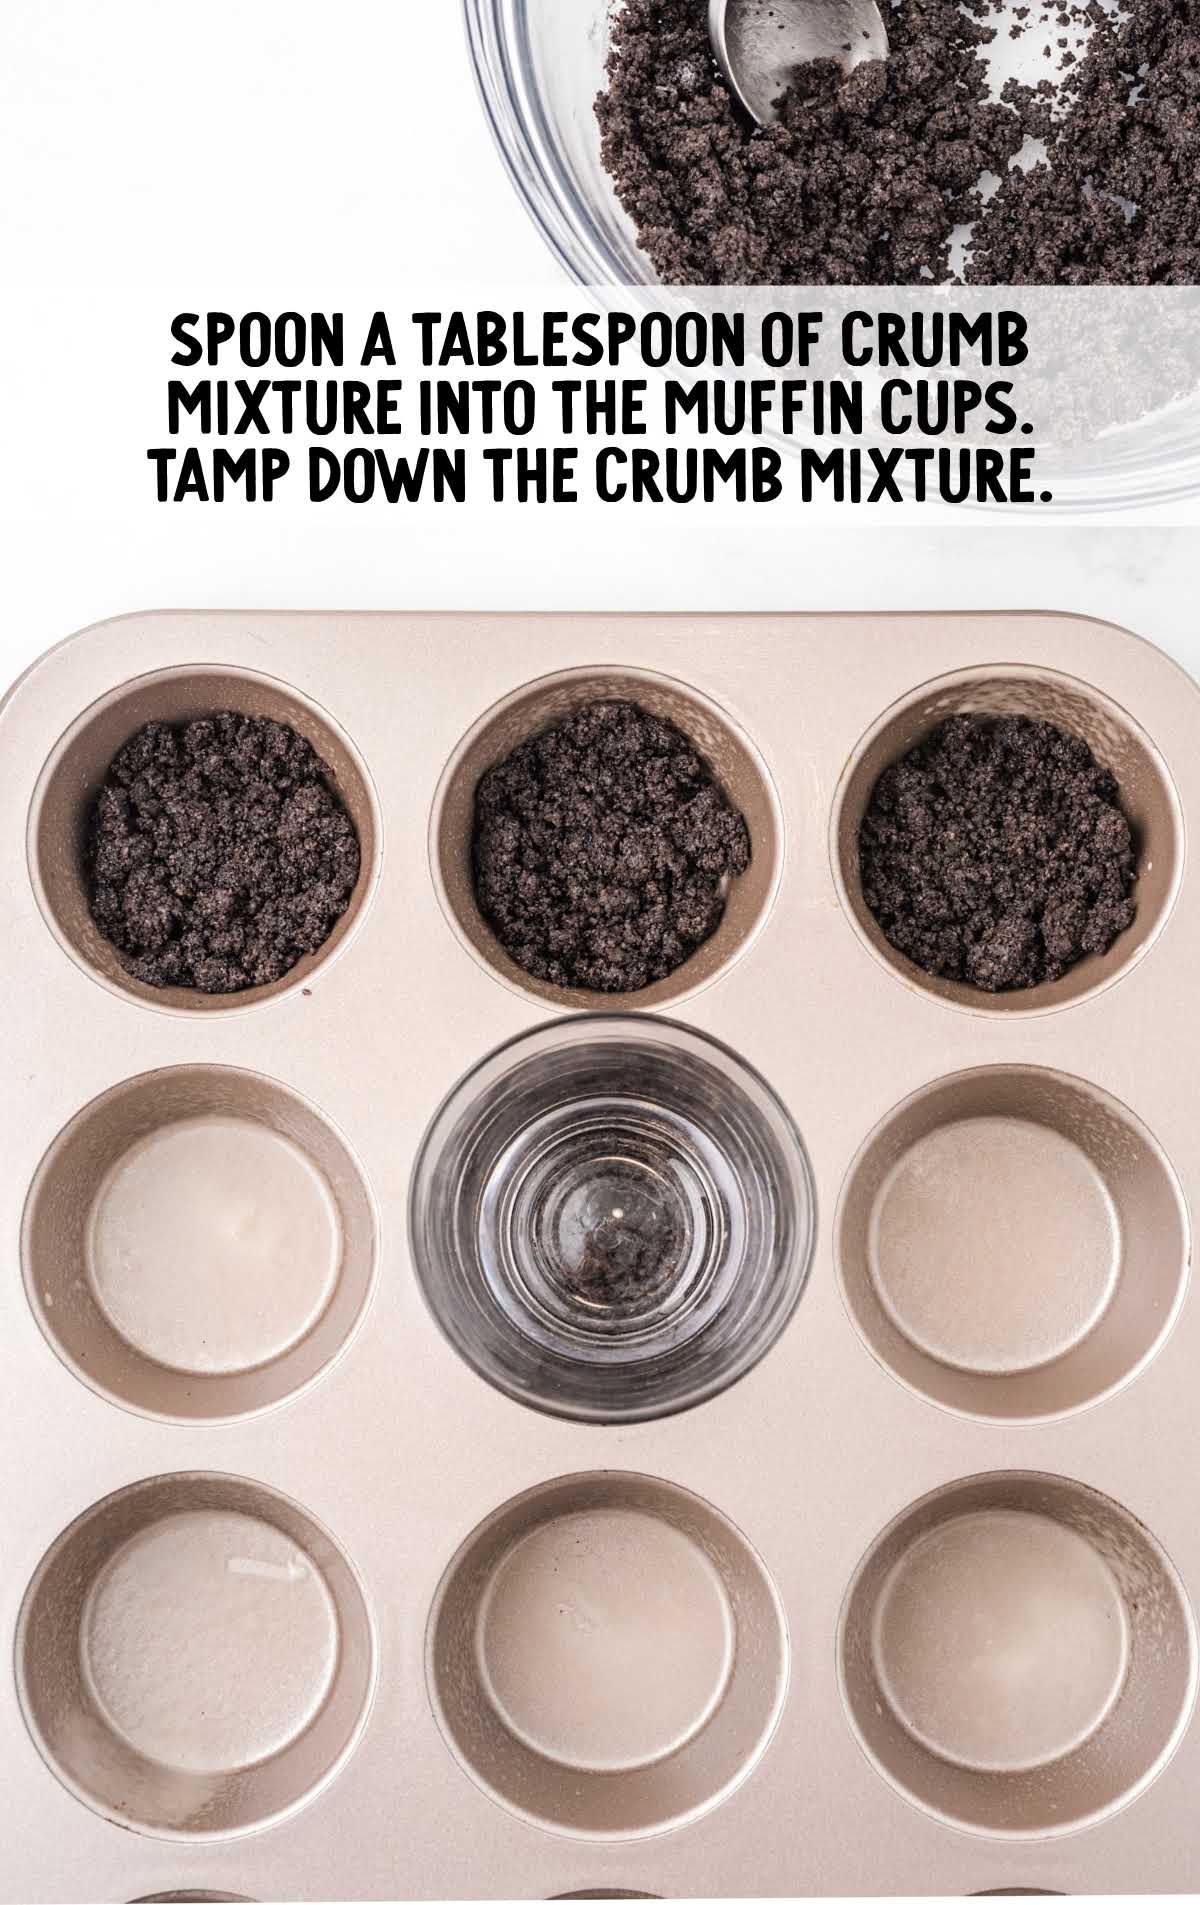 crumb mixture being spooned into muffin cups